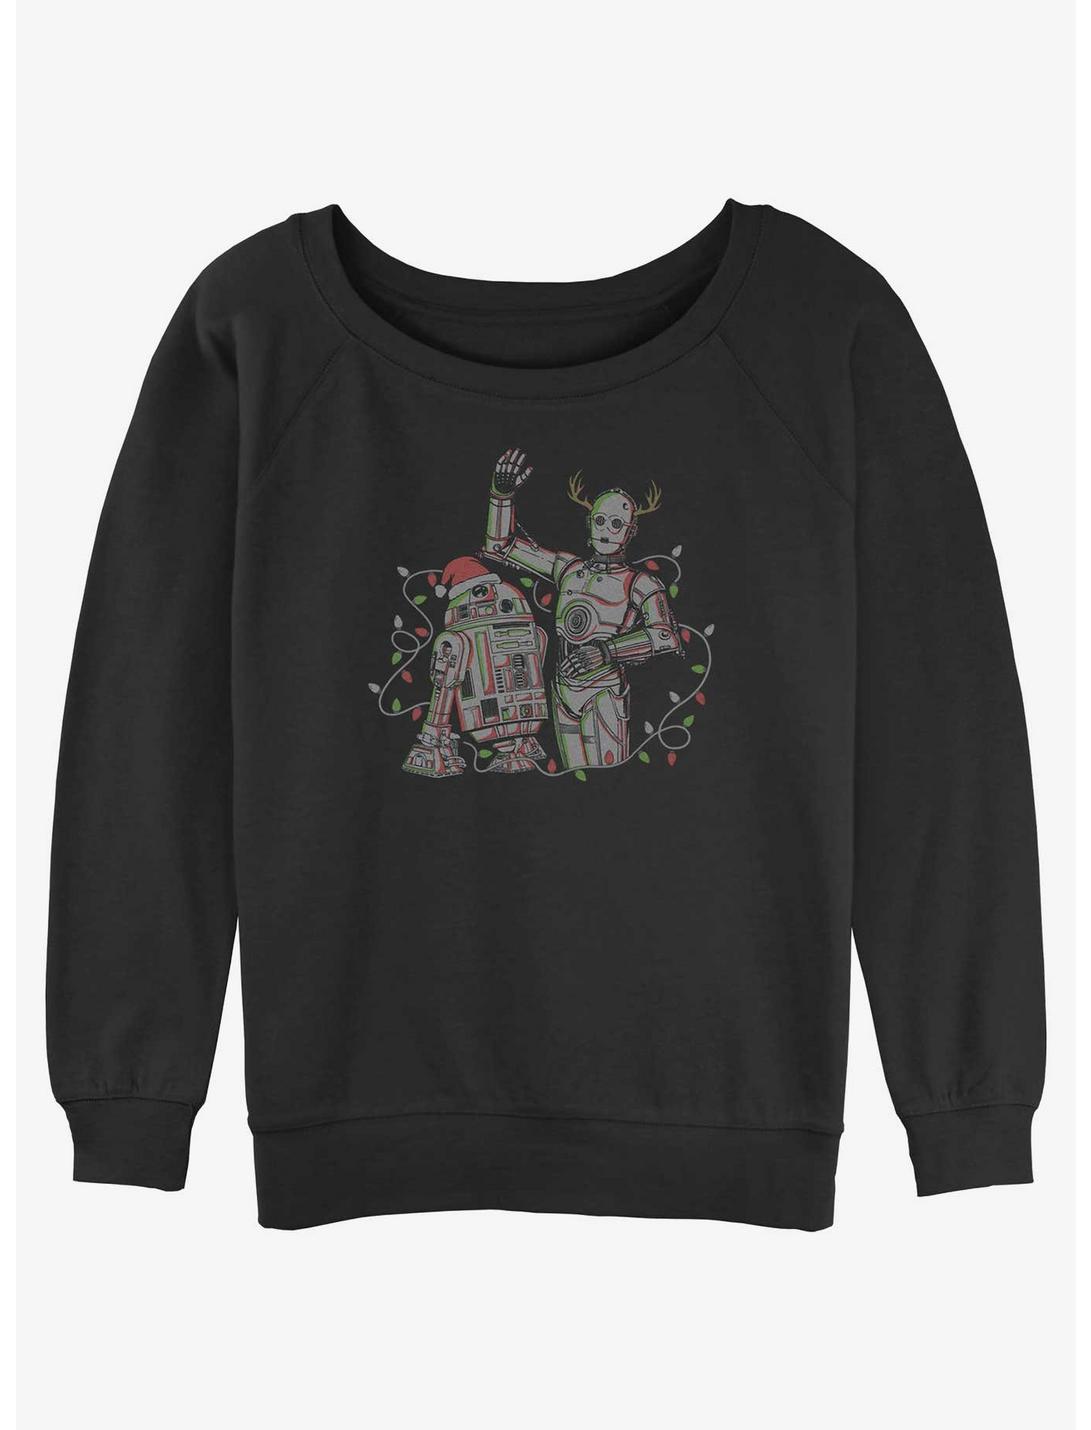 Star Wars Holiday Droids R2-D2 and C-3PO Girls Slouchy Sweatshirt, BLACK, hi-res